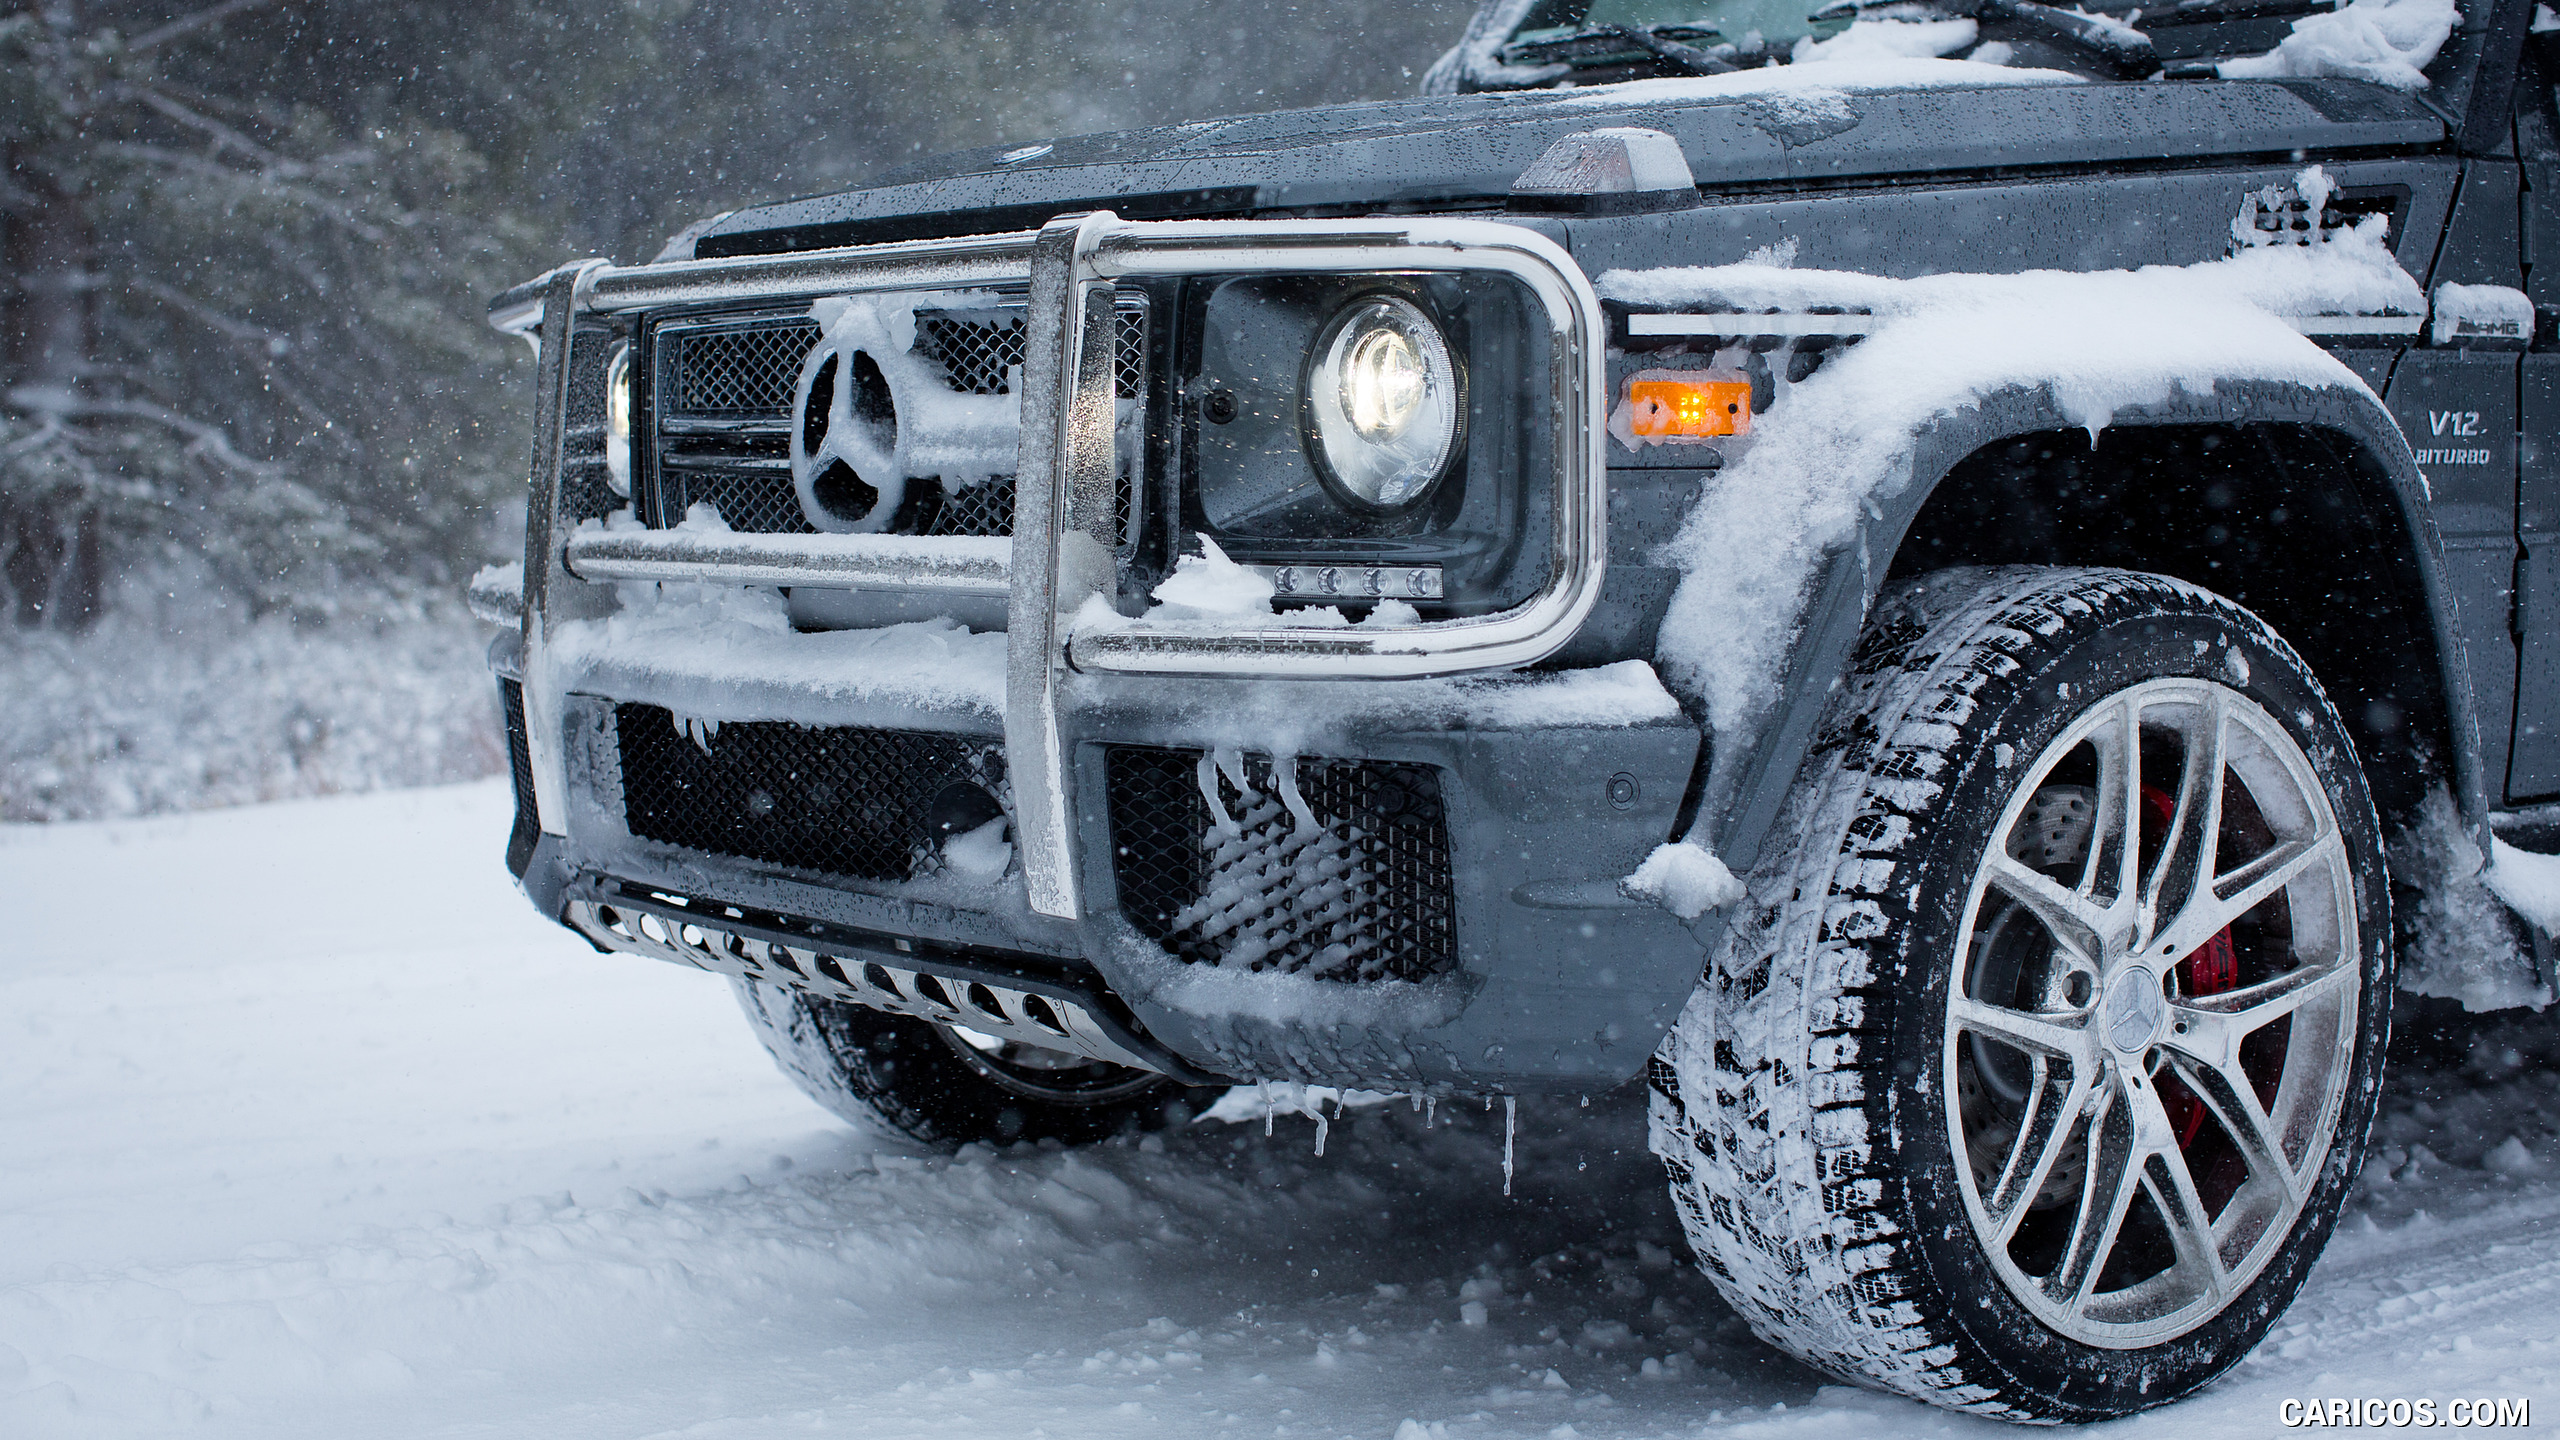 2017 Mercedes-AMG G65 AMG (US-Spec) in snow - Detail, #37 of 45